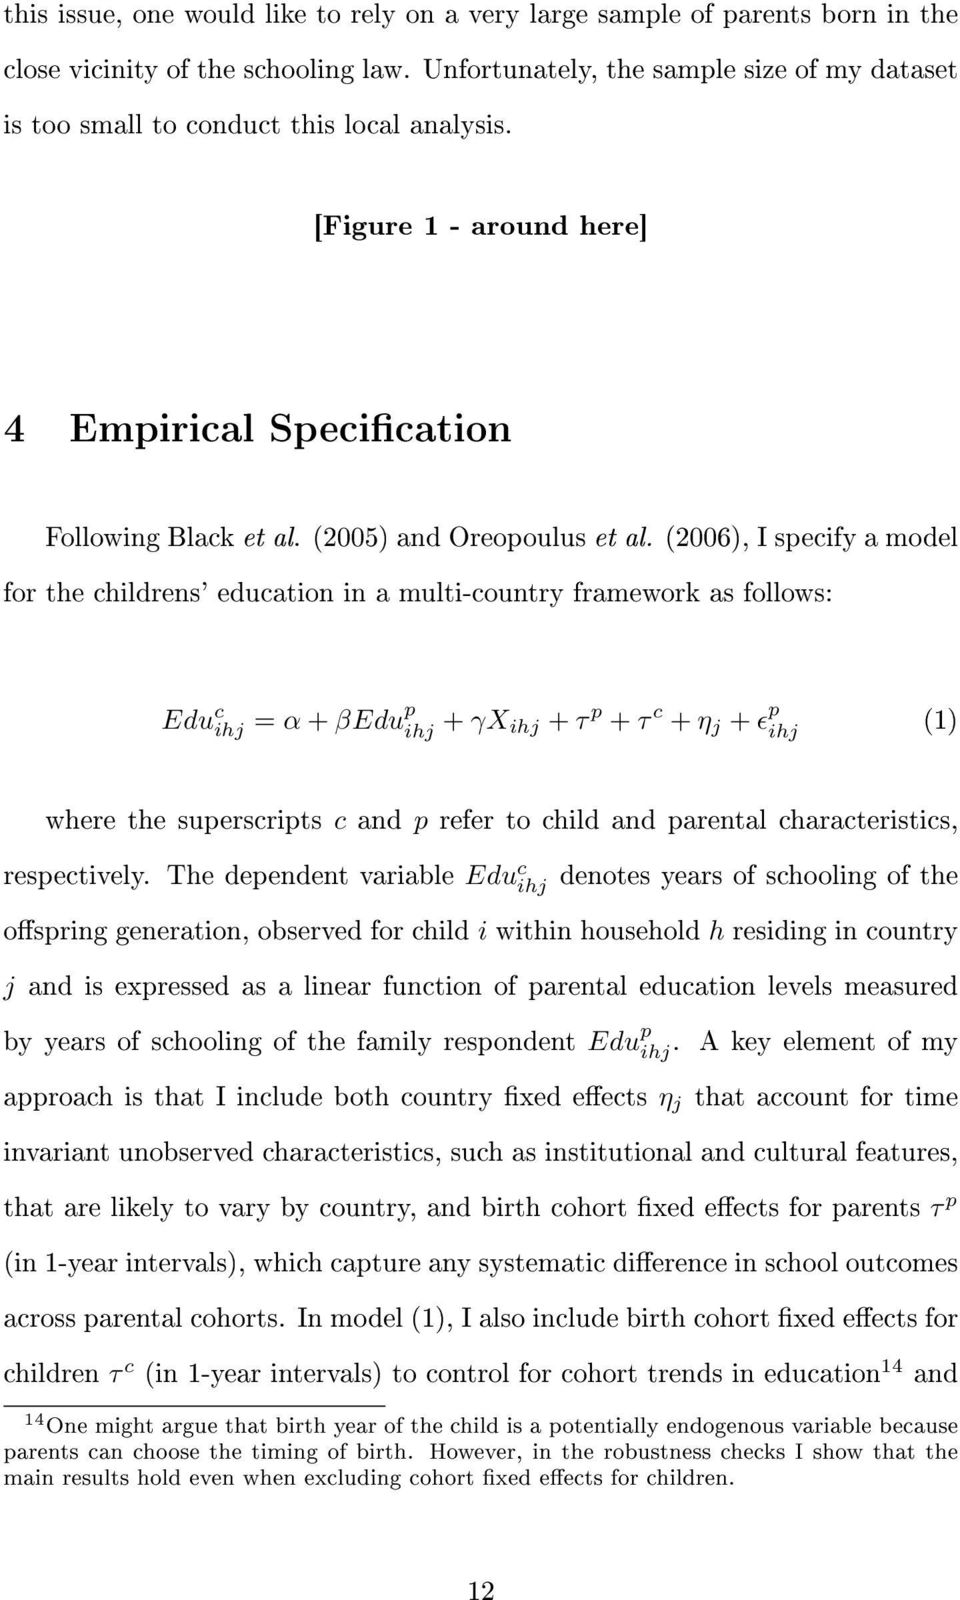 (2006), I specify a model for the childrens' education in a multi-country framework as follows: Edu c ihj = α + βedu p ihj + γx ihj + τ p + τ c + η j + ɛ p ihj (1) where the superscripts c and p